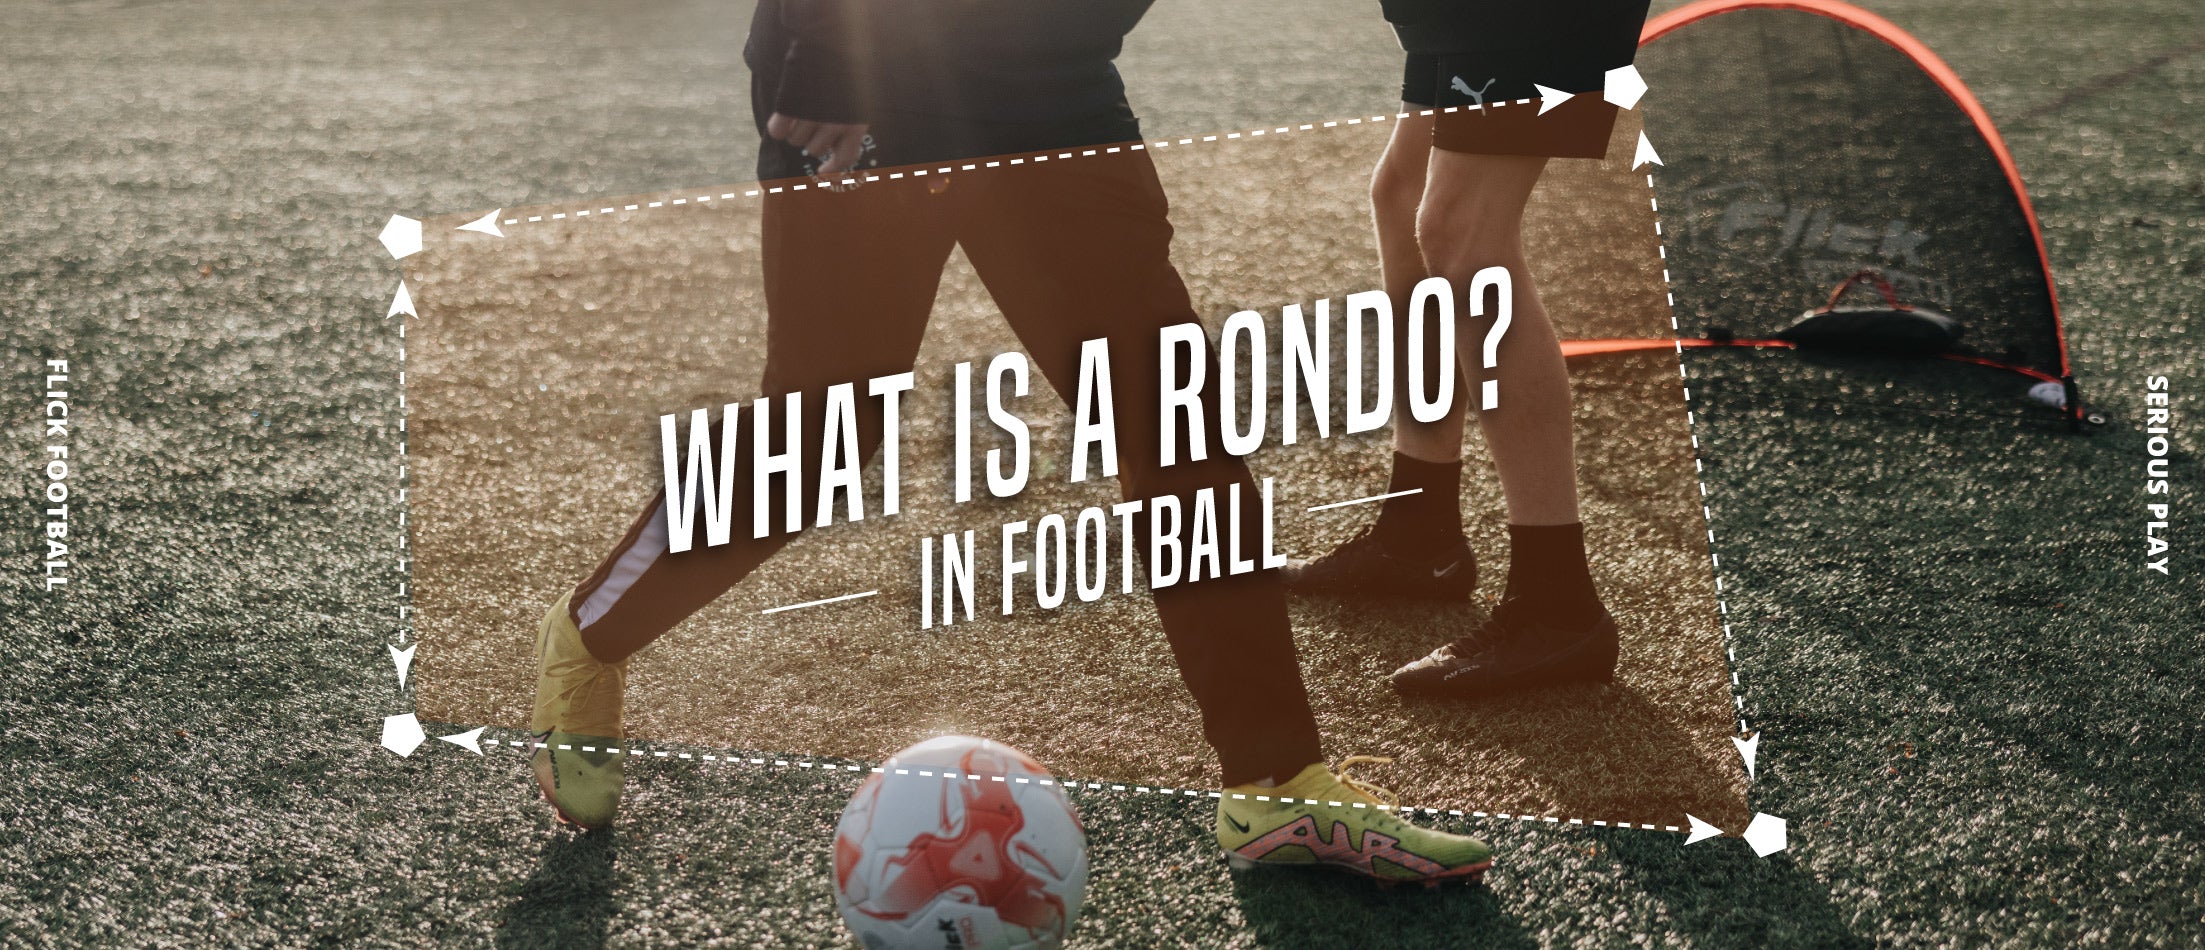 What is a Rondo in Football?